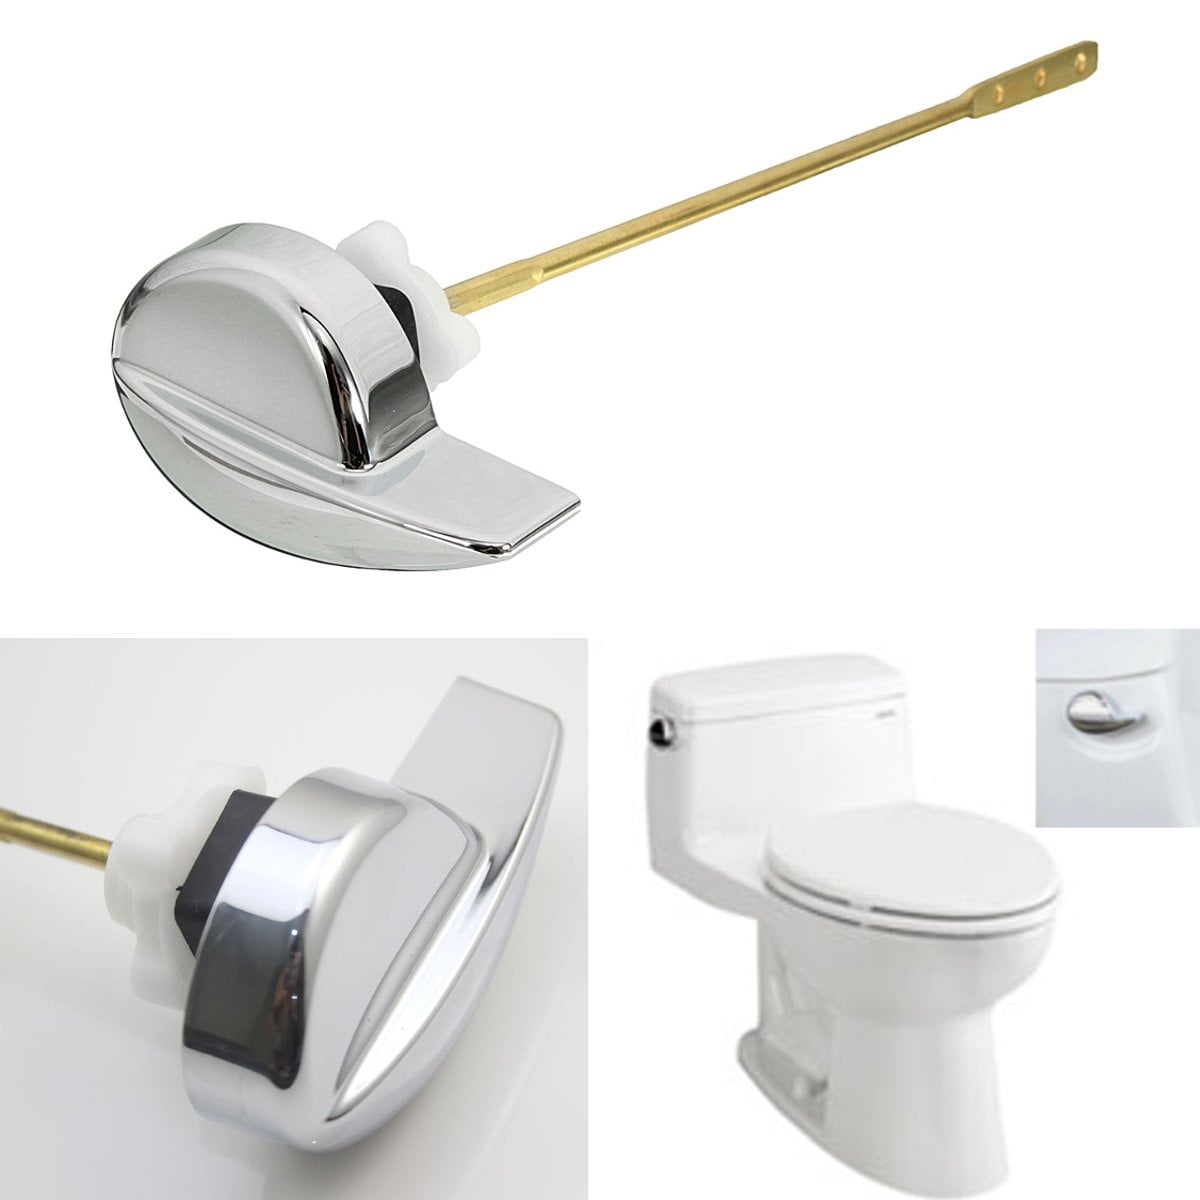 Senmubery 2 Packs Chrome Finish Side Mount Toilet Tank Flush Lever Handle Replacement for Most Side Mount Toilets